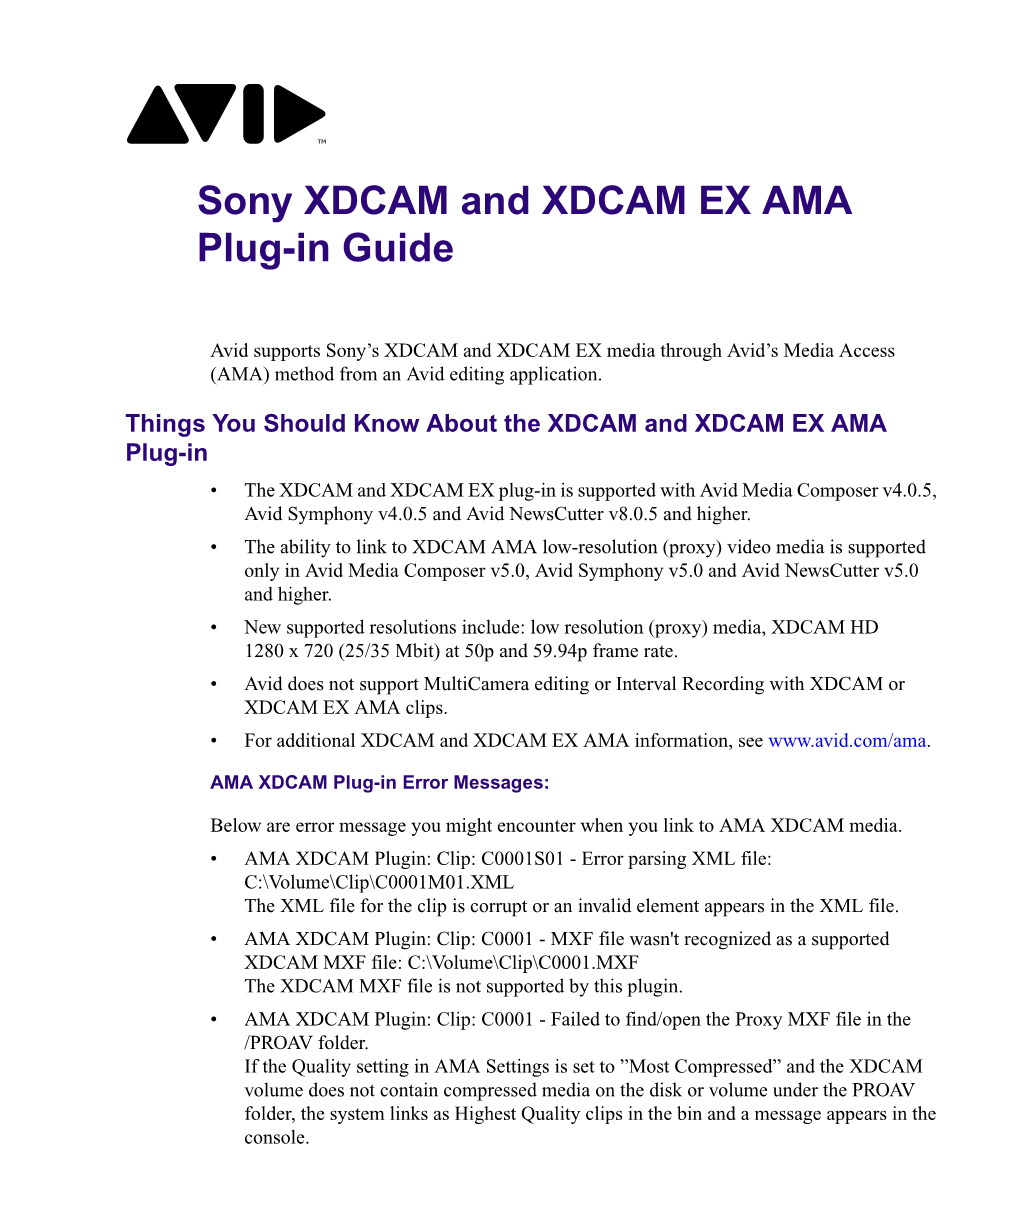 Sony XDCAM and XDCAM EX AMA Plug-In Guide